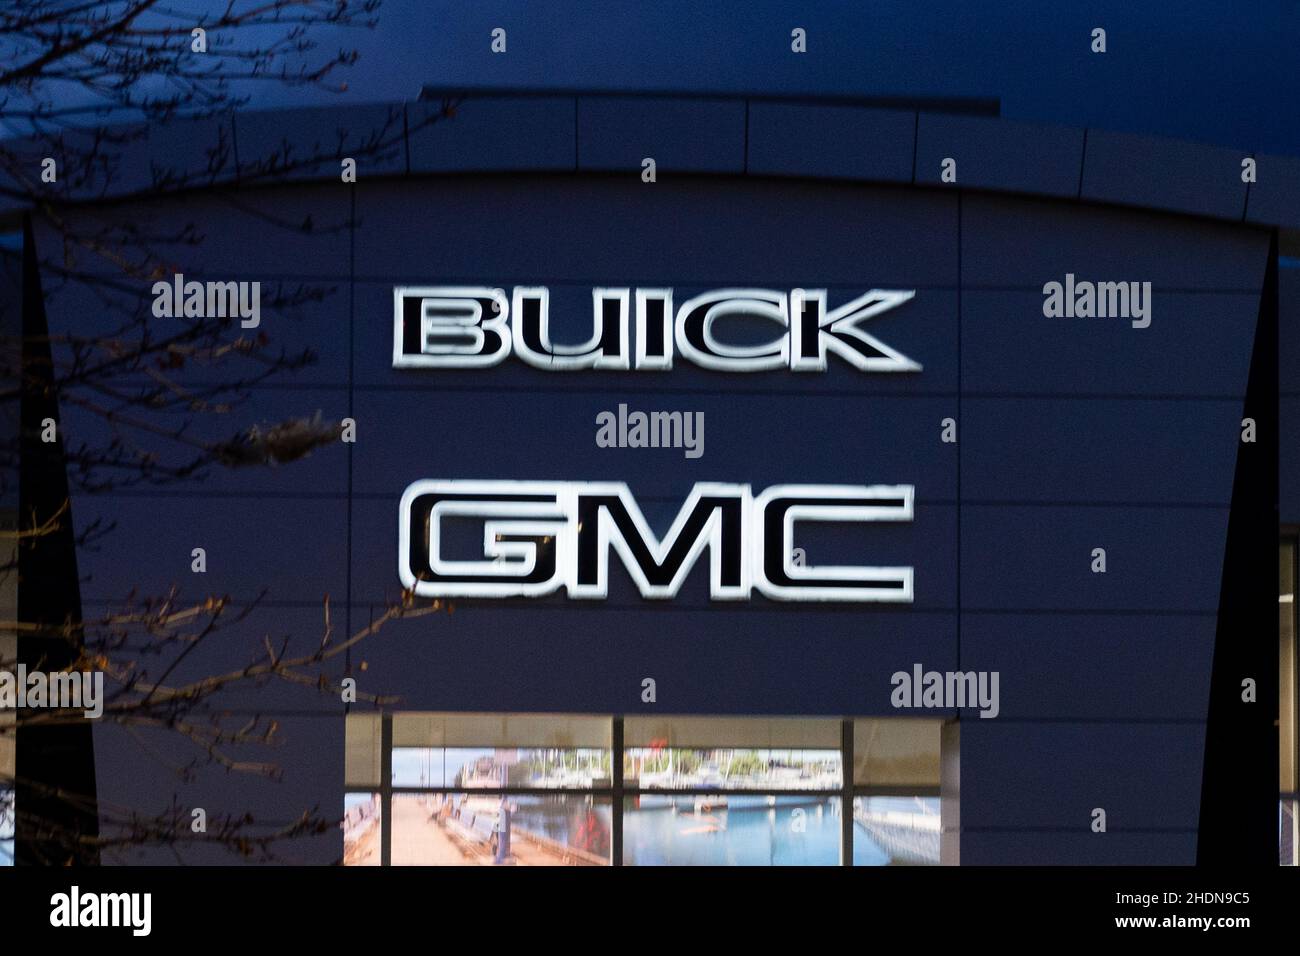 Toronto, ON, Canada – December 22, 2021: Close up sign of a Buick GMC Car Dealer in Toronto. A division of the American automobile manufacturer Genera Stock Photo